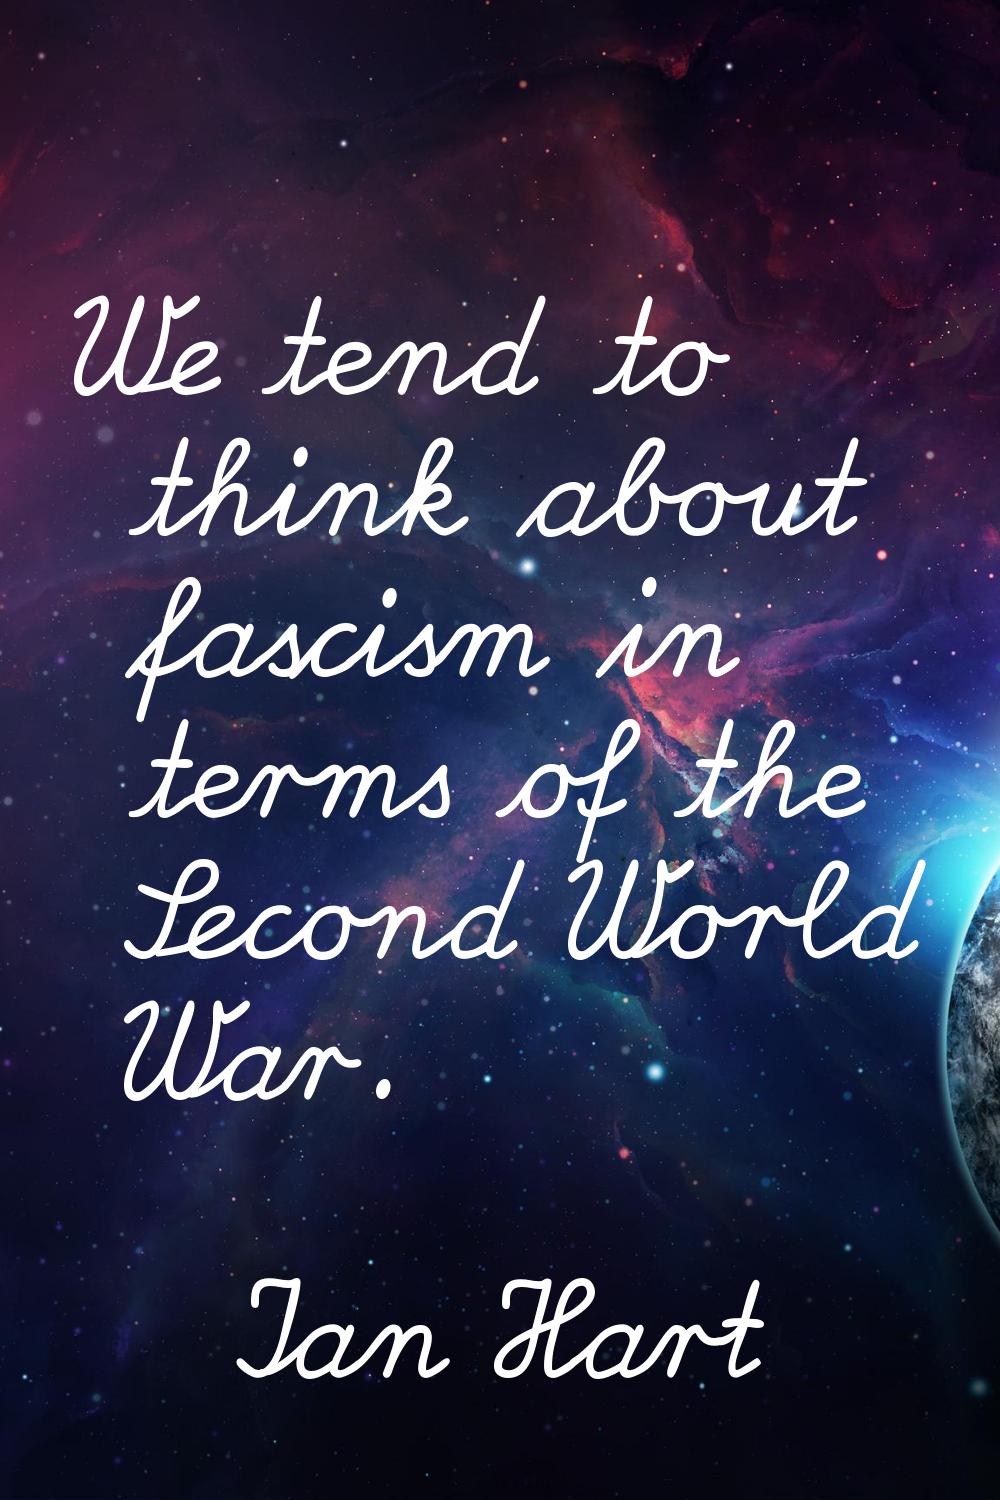 We tend to think about fascism in terms of the Second World War.